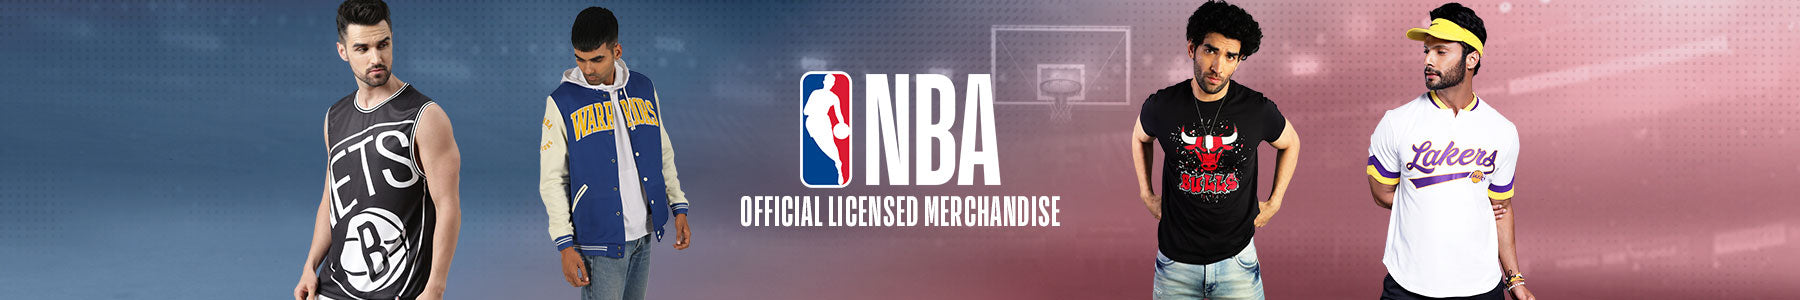 NBA 75: Limited Edition Collection Banner